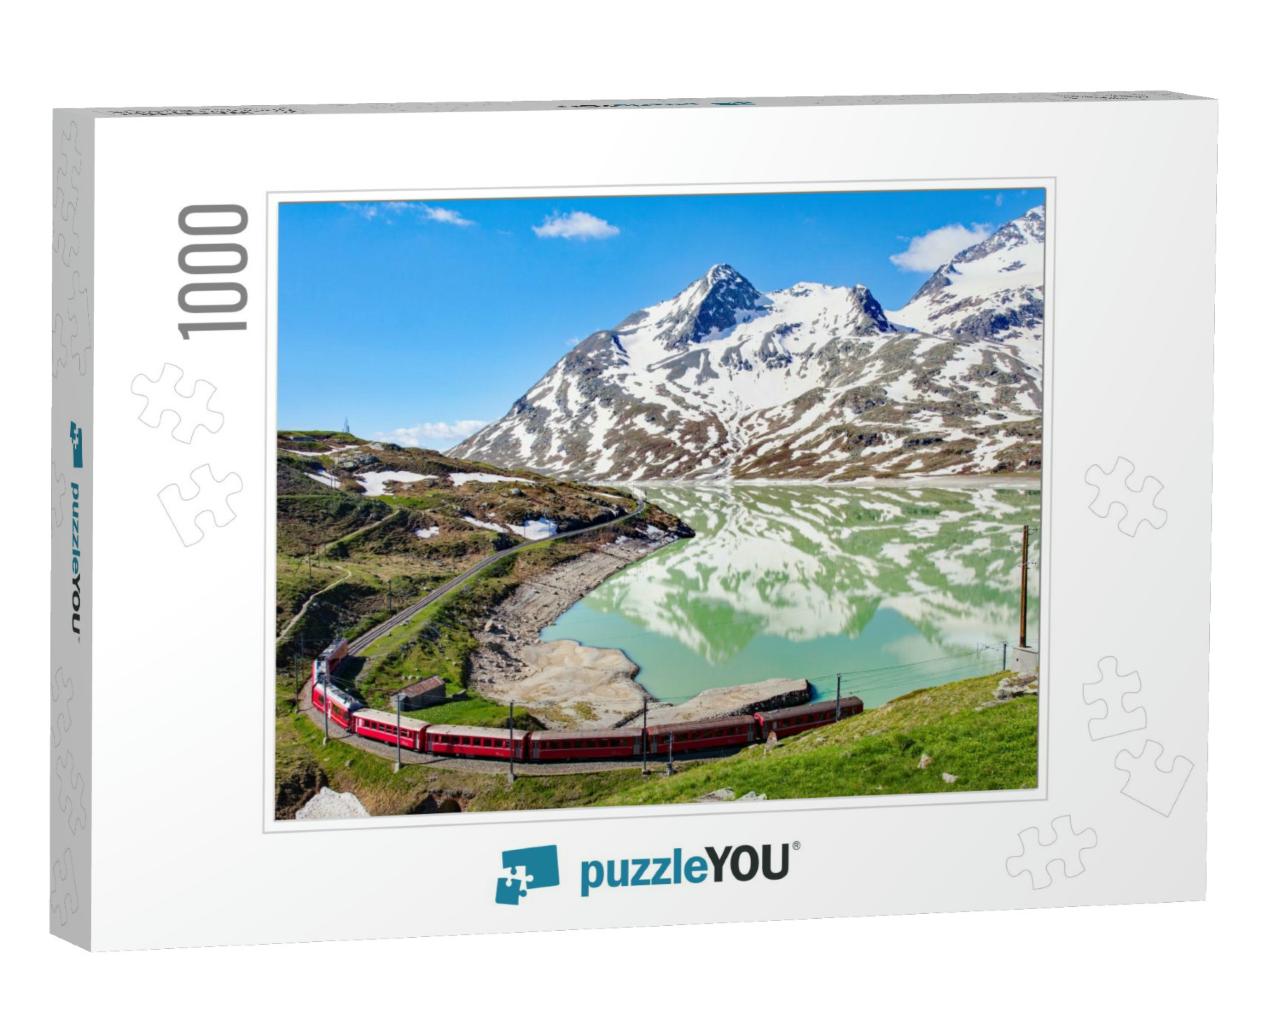 Red Train - Bernina Pass Ch... Jigsaw Puzzle with 1000 pieces